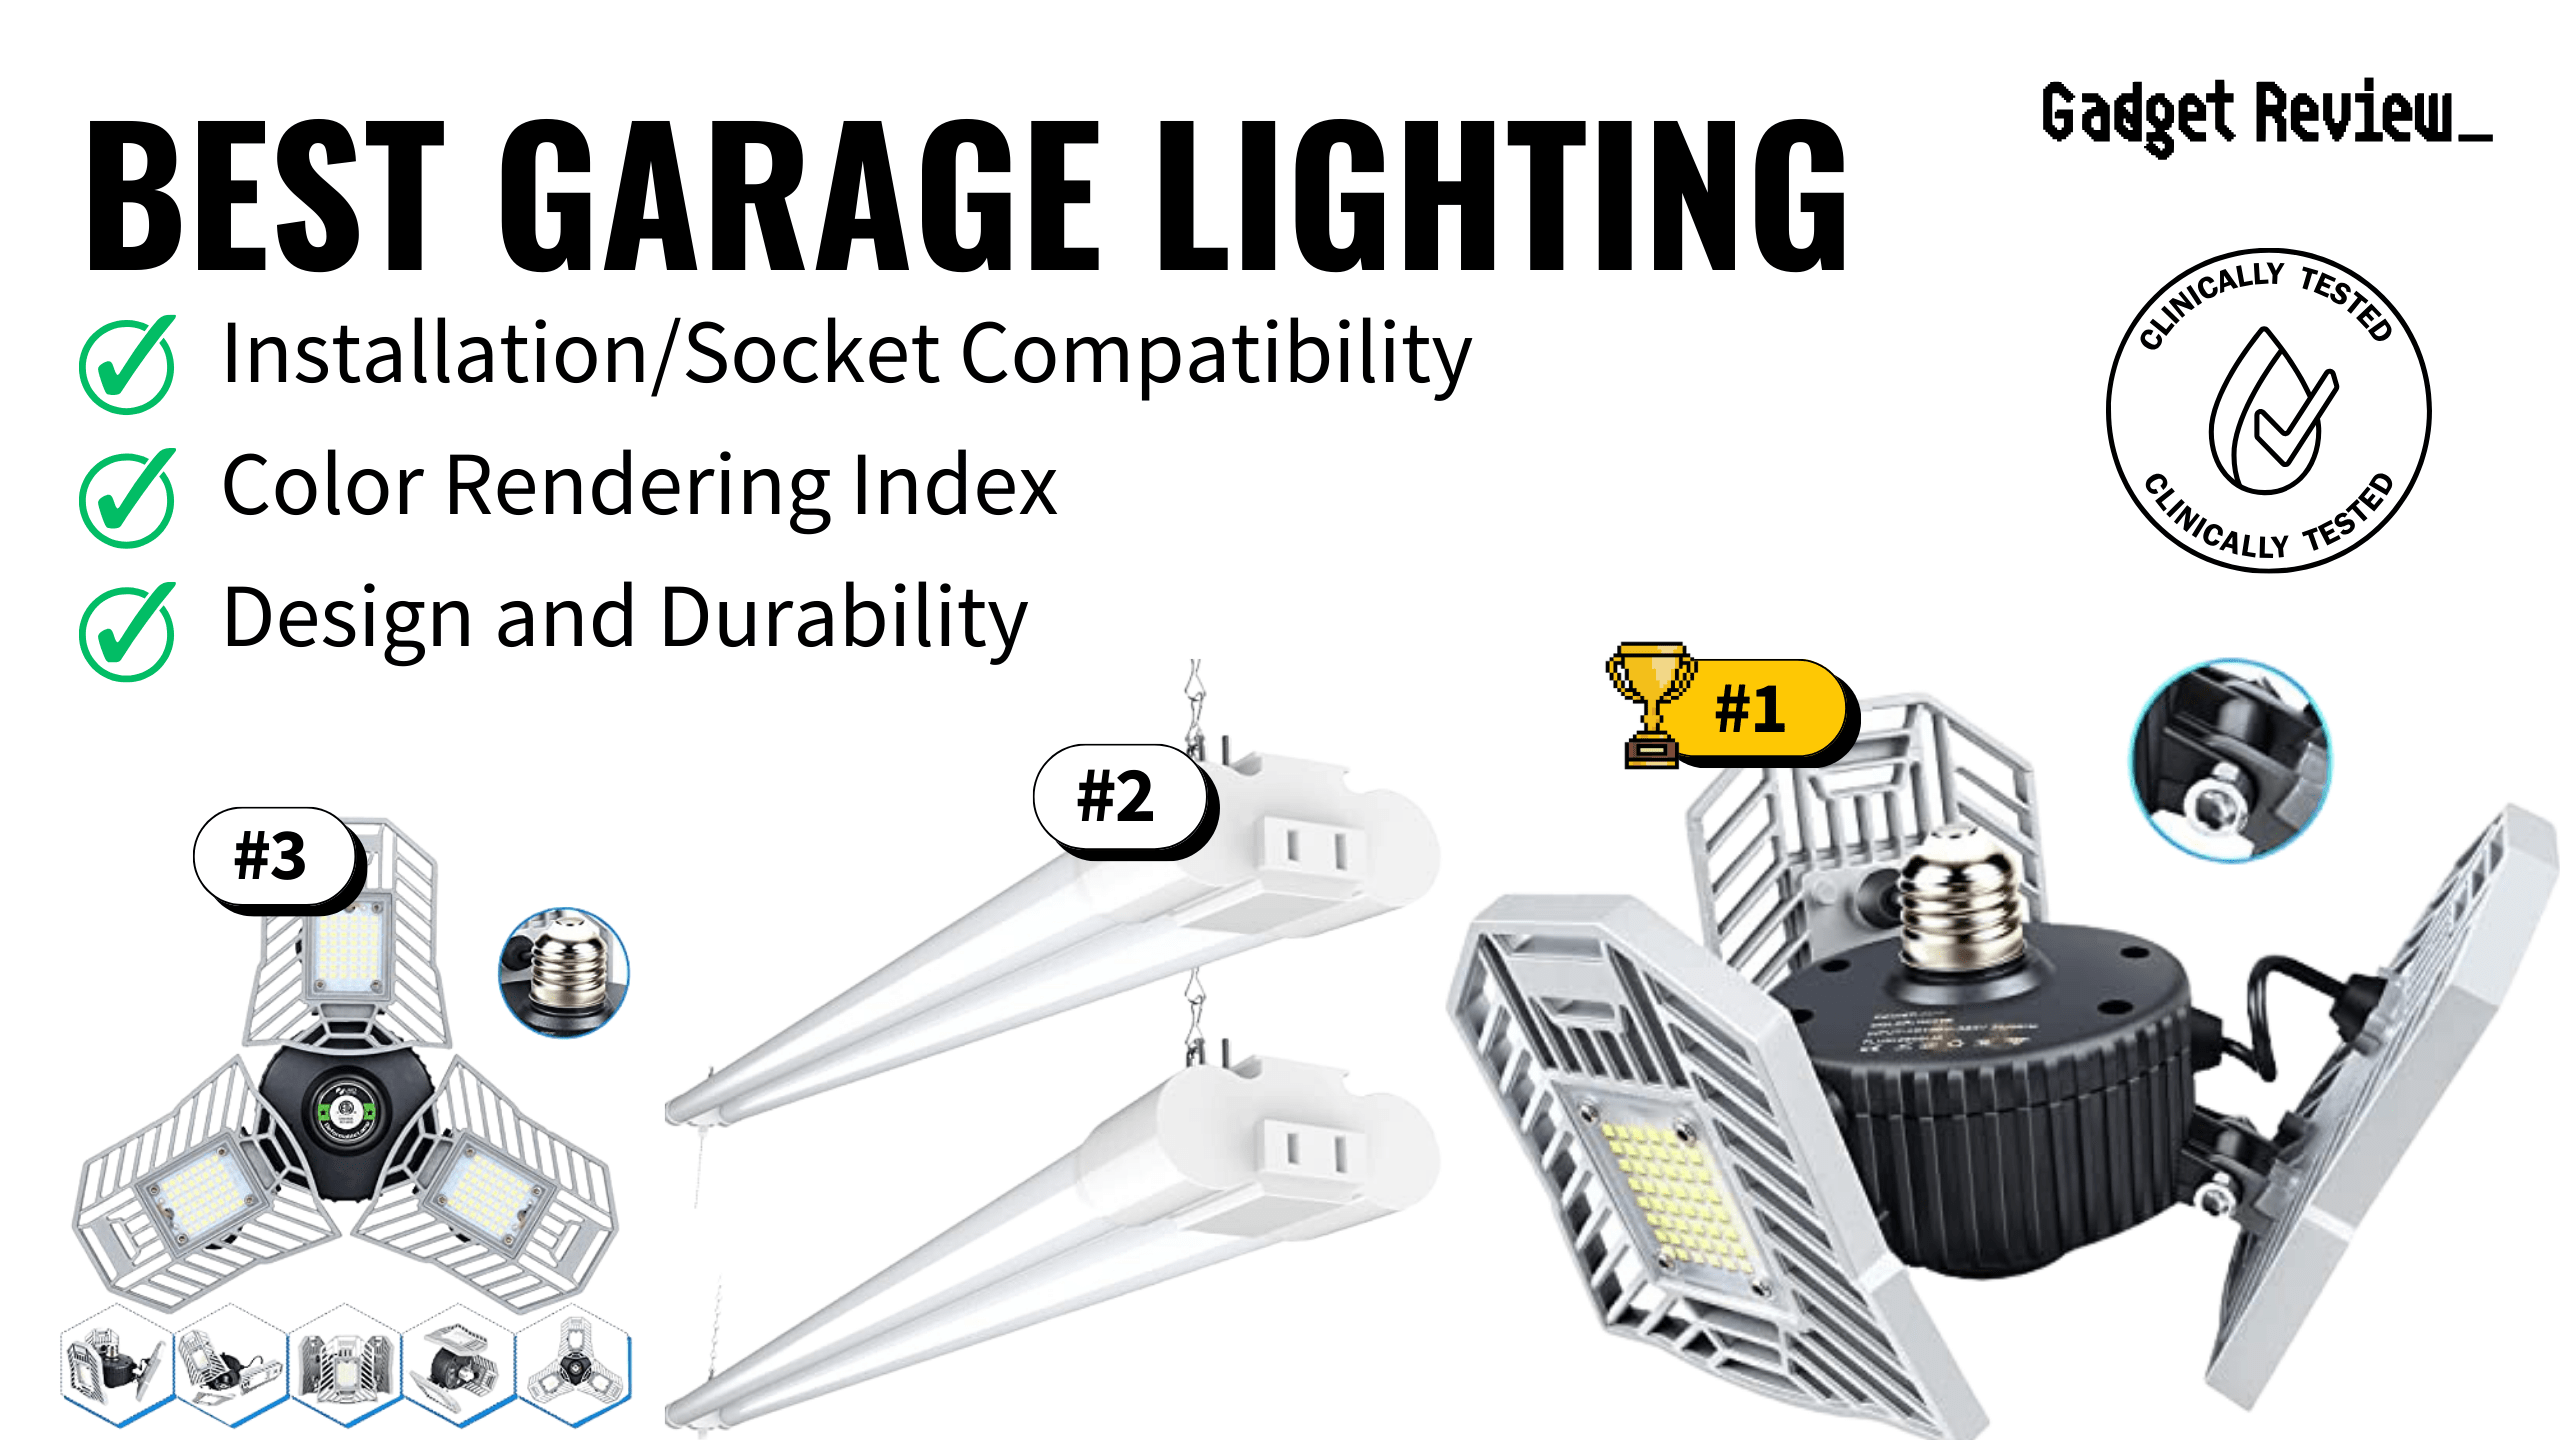 best garage lighting featured image that shows the top three best car models